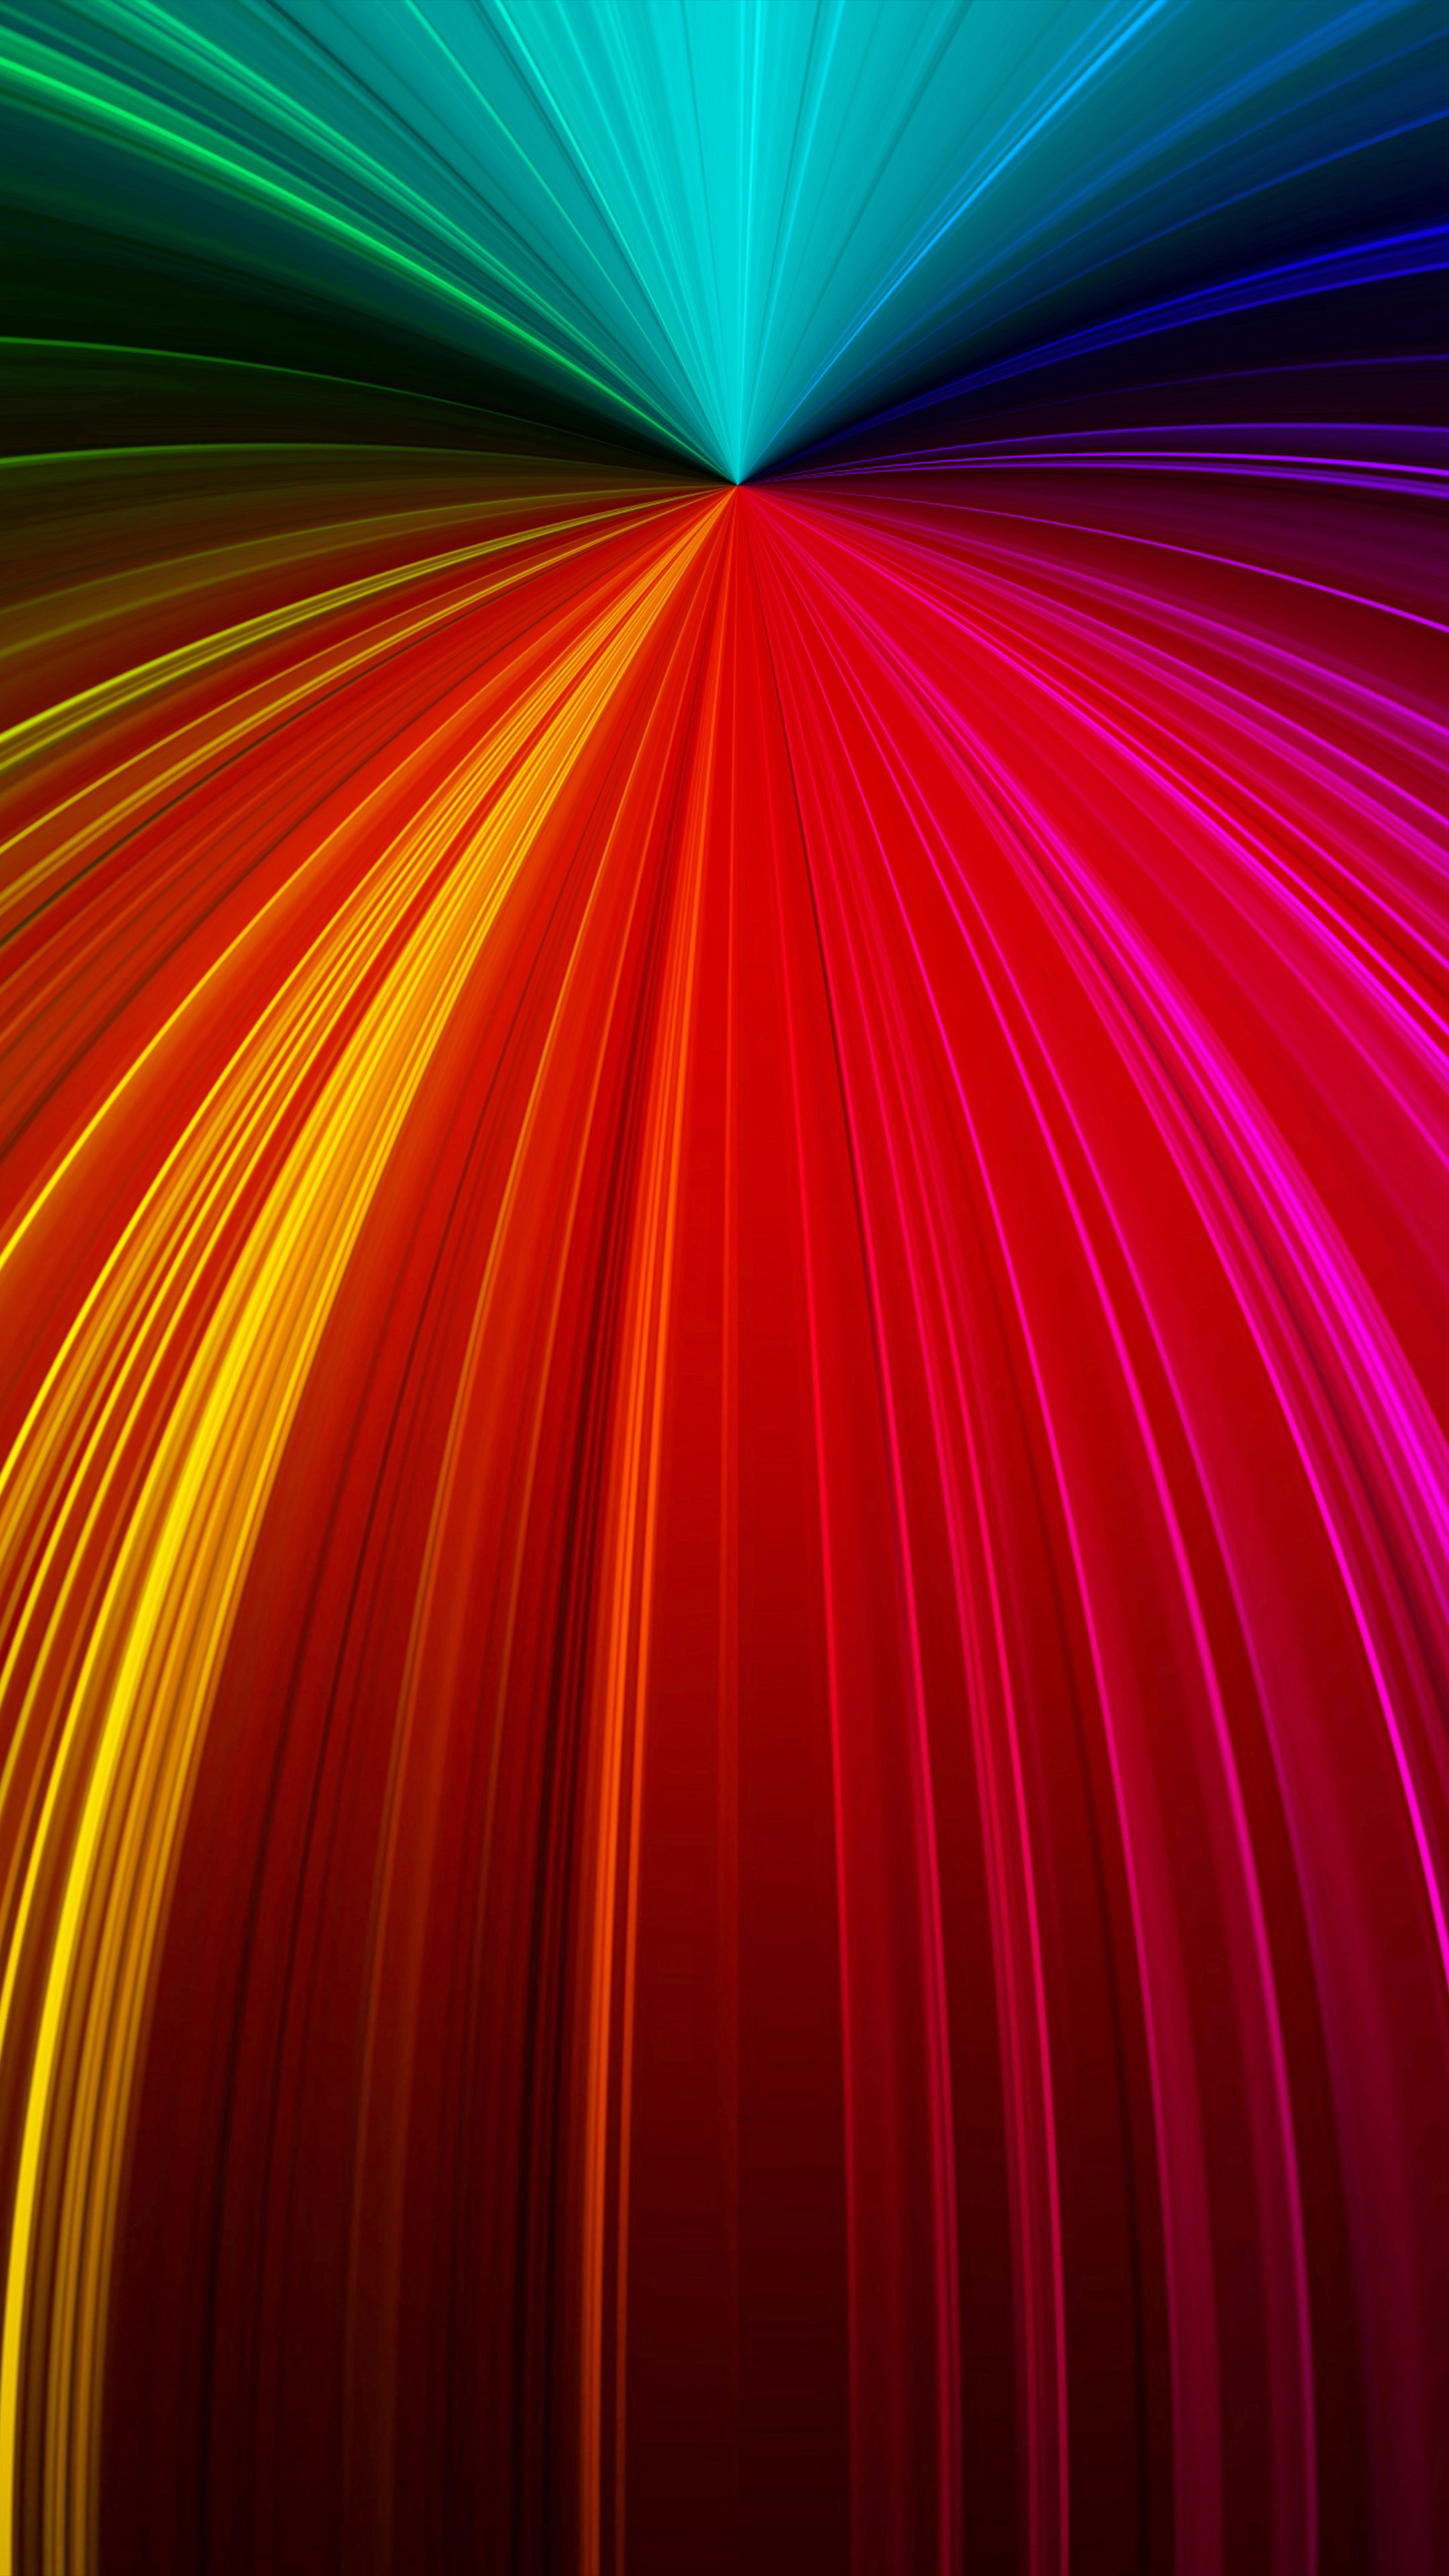 Colorful Rays Fractal Waves Free 4K Ultra HD Mobile Wallpaper